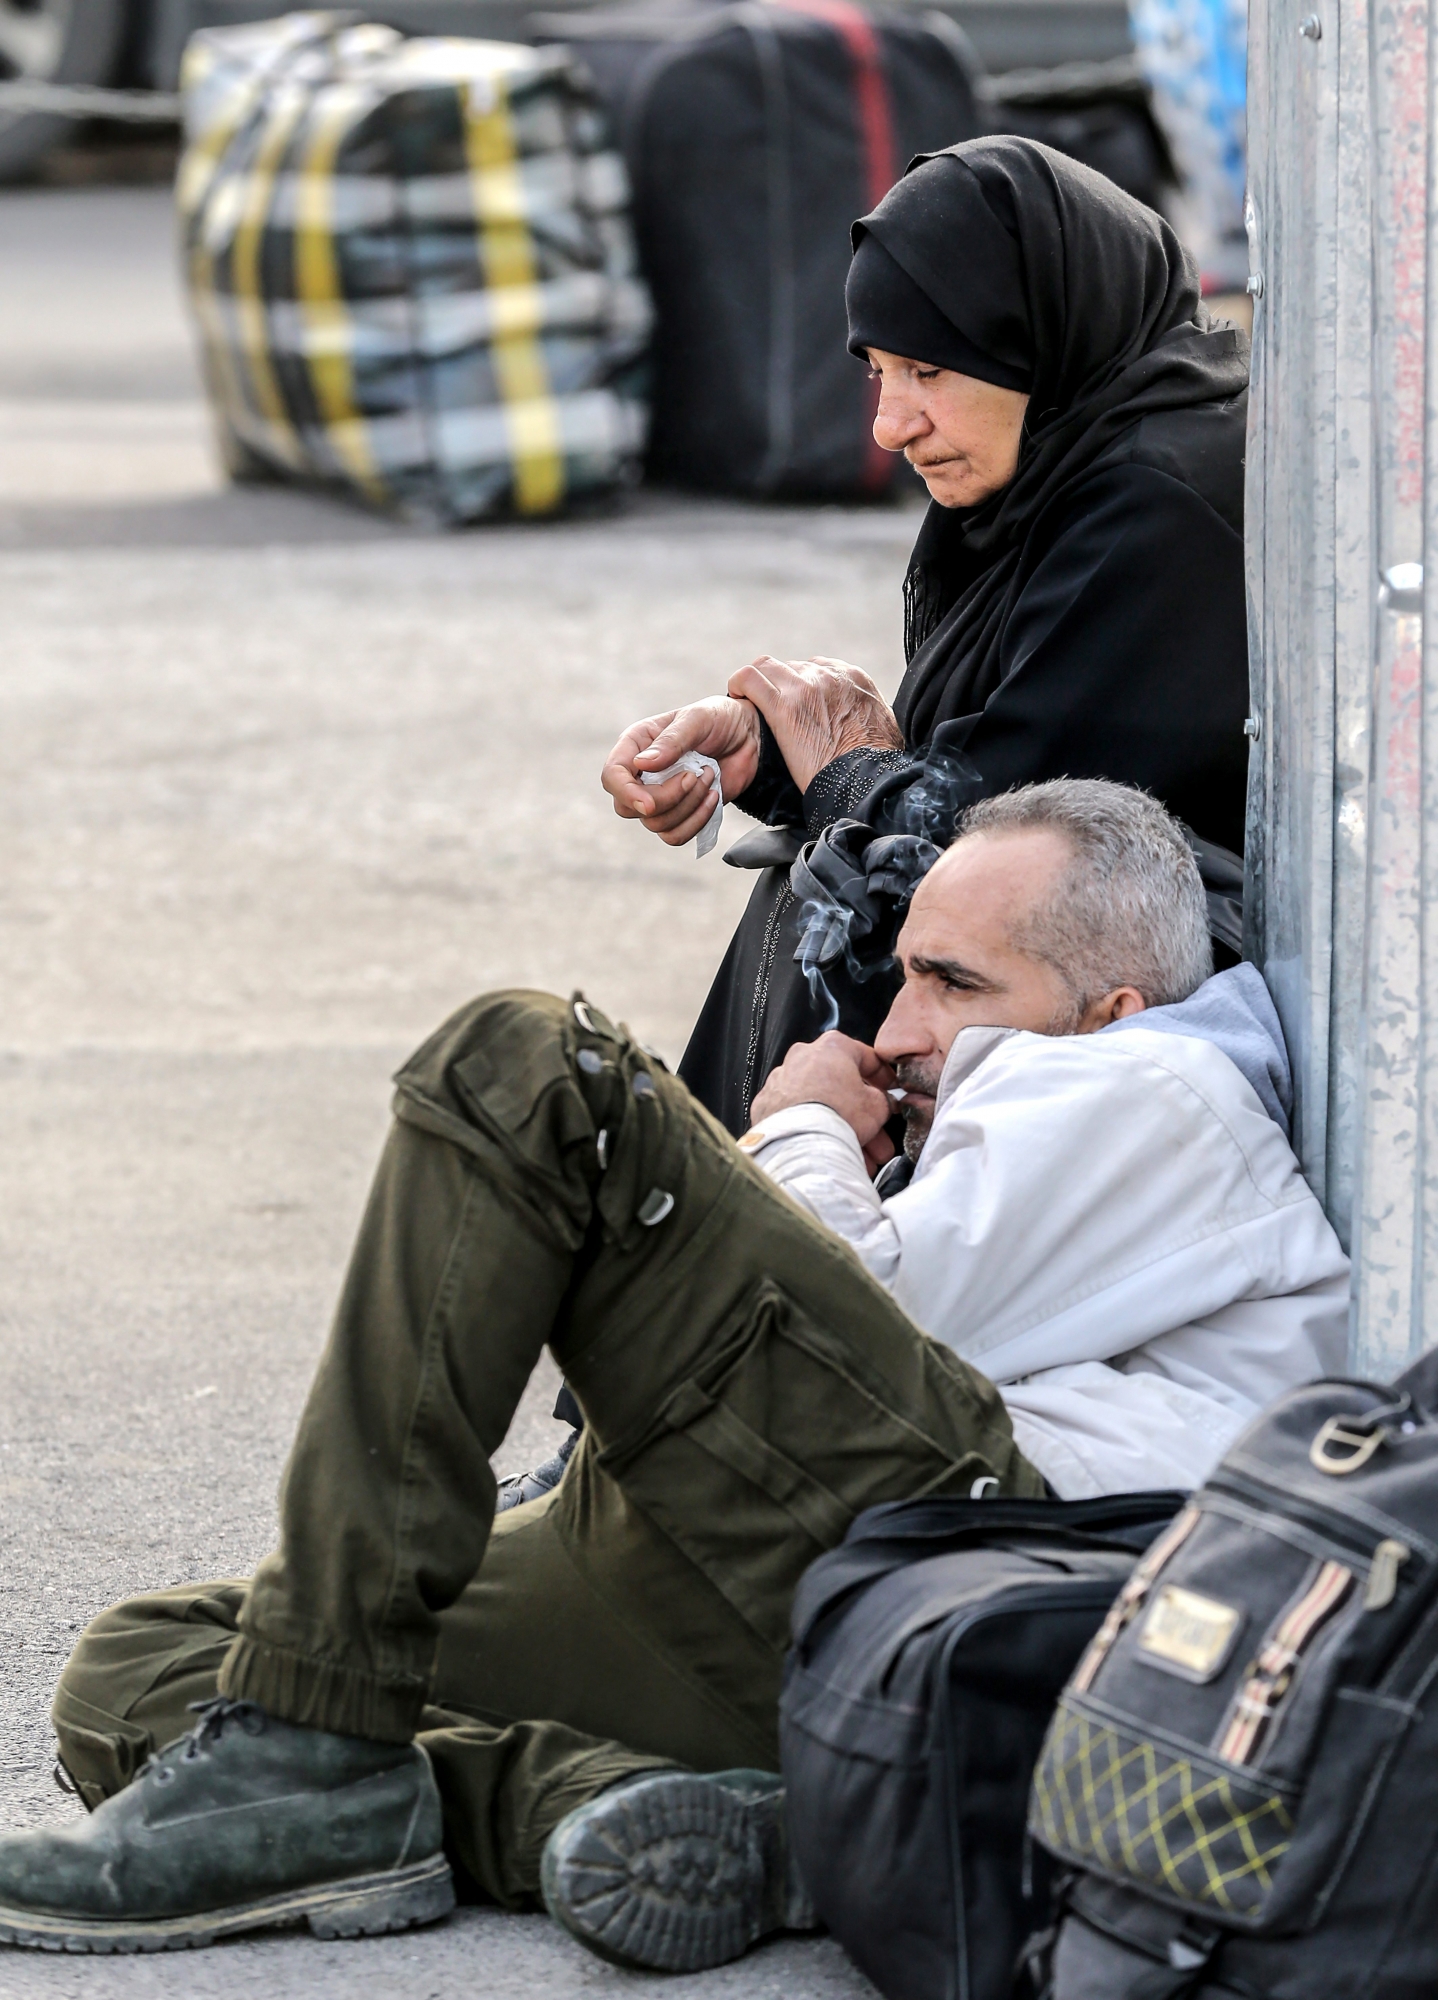 epa07491745 Syrian refugees gather as they wait to leave Beirut back to Syria, at the Bourj Hammoud area, northern Beirut, Lebanon, 08 April 2019. Reports state hundreds of Syrian refugees began their trip home on 08 April from different areas in Lebanon, as part of a coordinated operation between authorities in Beirut and Damascus. There are over one million Syrian refugees registered with the UNHCR in Lebanon, while the Lebanese government estimates some 1.5 million Syrians living in the country. EPA/NABIL MOUNZER LEBANON SYRIA REFUGEES RETURN